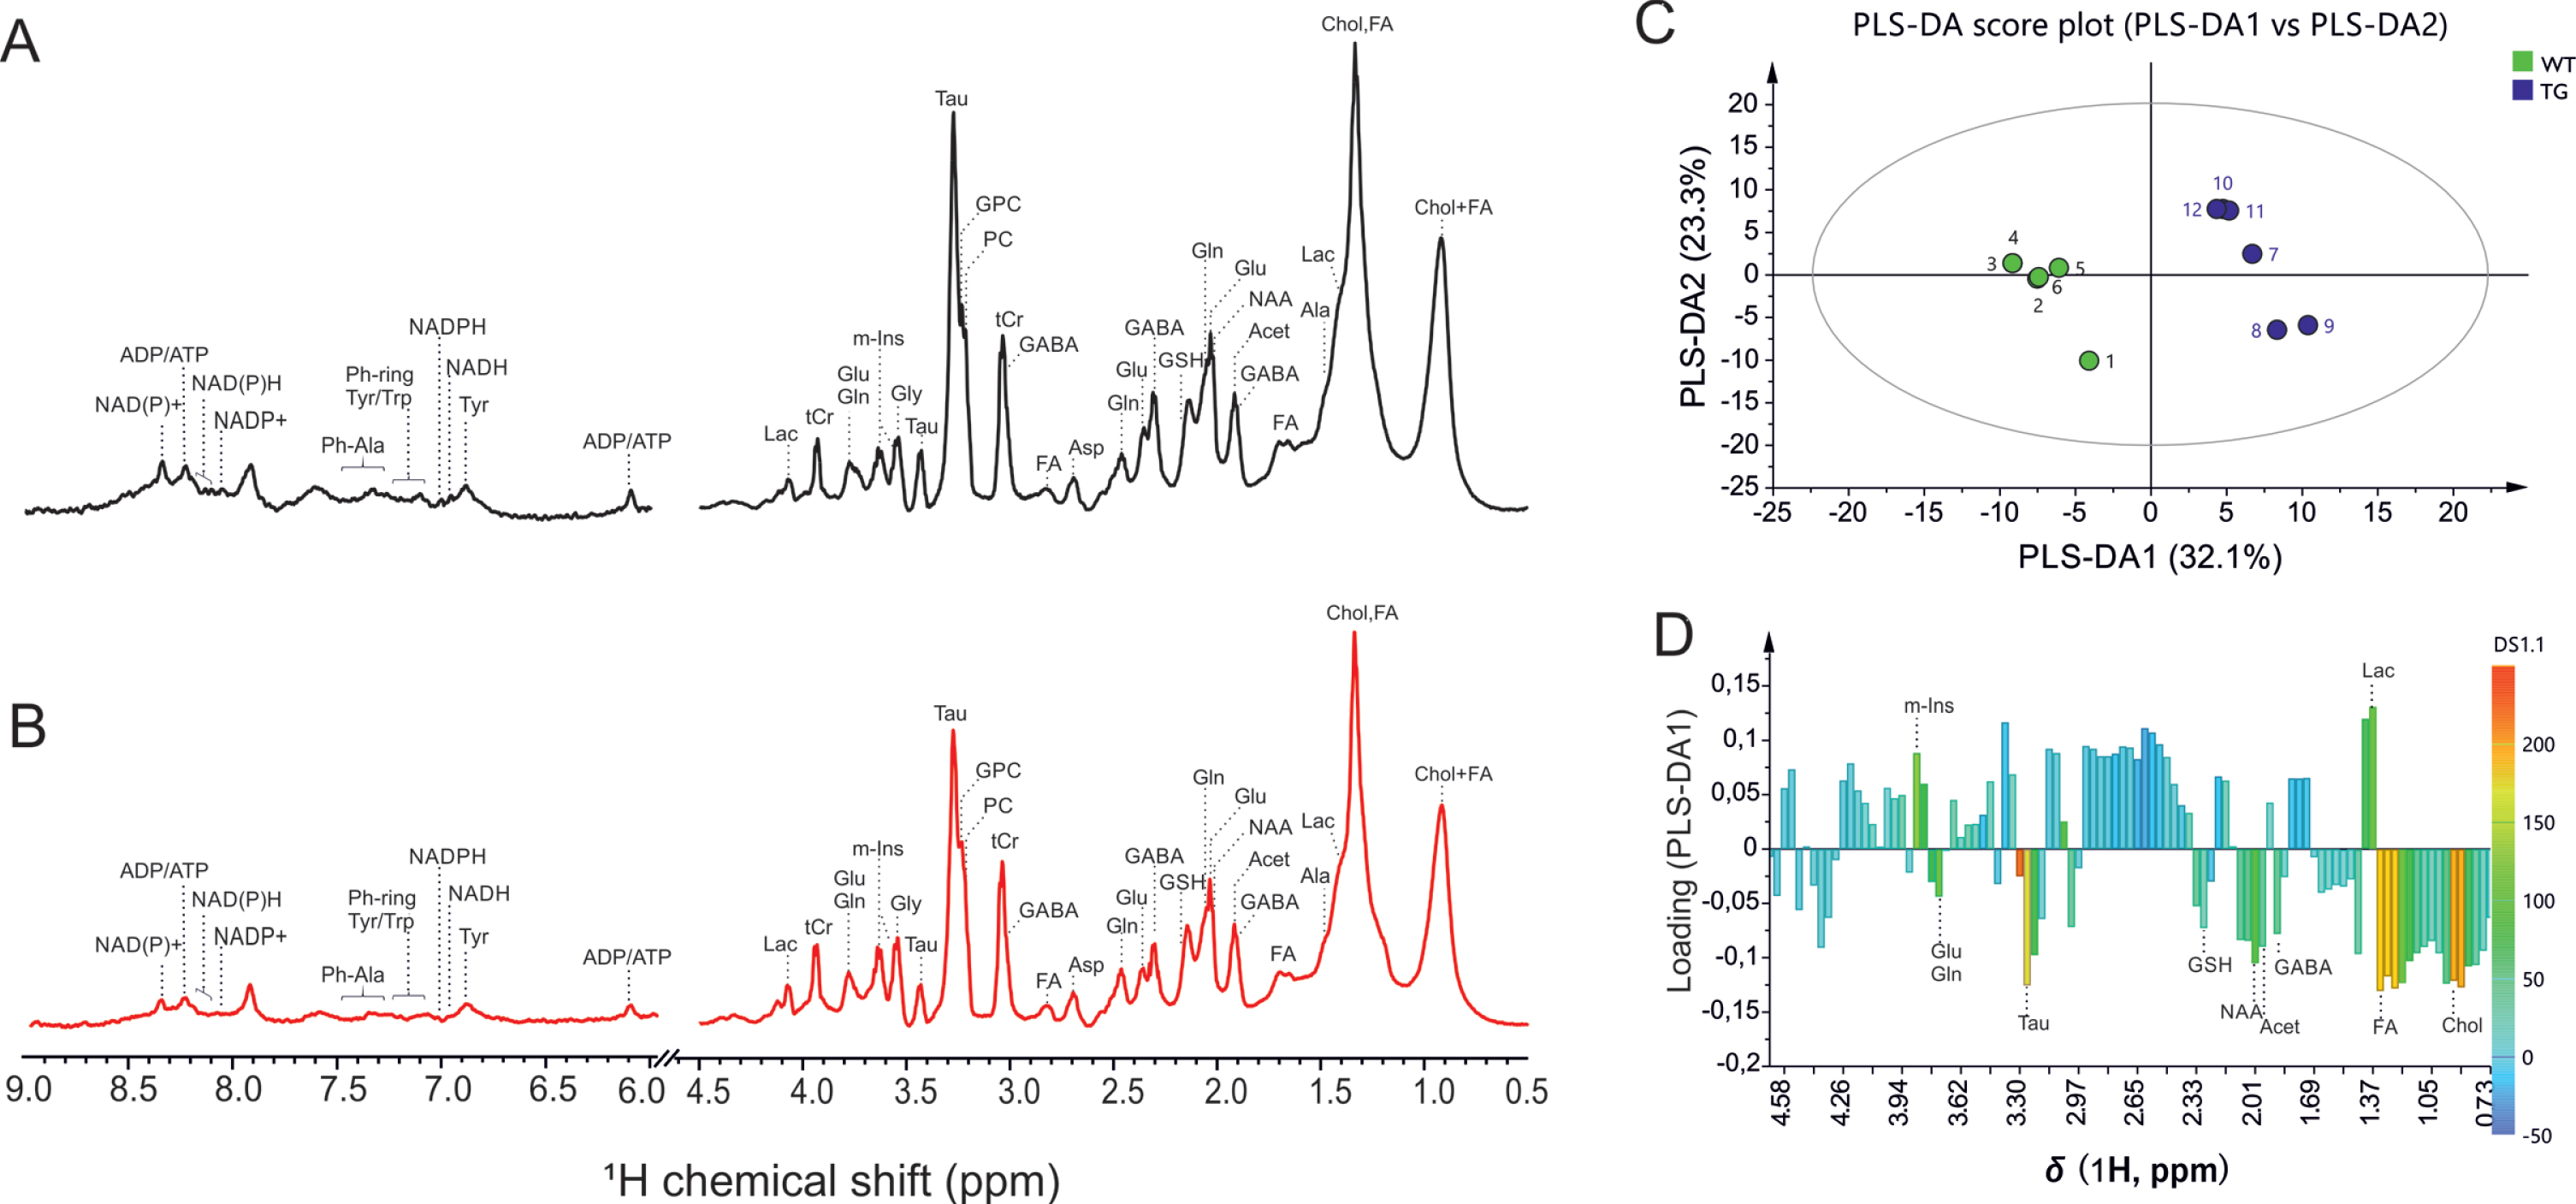 Representative high-resolution magic angle spin (HR-MAS) NMR spectra showing metabolic profile of SCN from (A) wild-type, and (B) Tg2576 mice. C, D) Multivariate analysis of the HR-MAS NMR spectra (n = 6 per group) using partial least square-discriminant analysis (PLS-DA) modelling (R2 = 0.907, Q2 = 0.989). C) Scores plots (PLS-DA1 versus PLS-DA2). The score plot explains 55.4%of total variance of WT SCN clustering in the negative PLSDA1 scores, and Tg2576 SCN in the positive PLSDA1 scores. D) Loading plots of PLS-DA1 for all buckets containing assigned peaks. Ala, alanine; Asp, aspartate; Chol, cholesterol; FA, fatty acids; GSH, glutathione; GABA, g-aminobutyric acid; Glu, glutamate; Gln, glutamine; GPC, glycerophosphocholine; Gly, glycine; Lac, lactate; m-Ins, myo-inositol; PC, phosphocholine; Tau, taurine; tCr, total creatine.